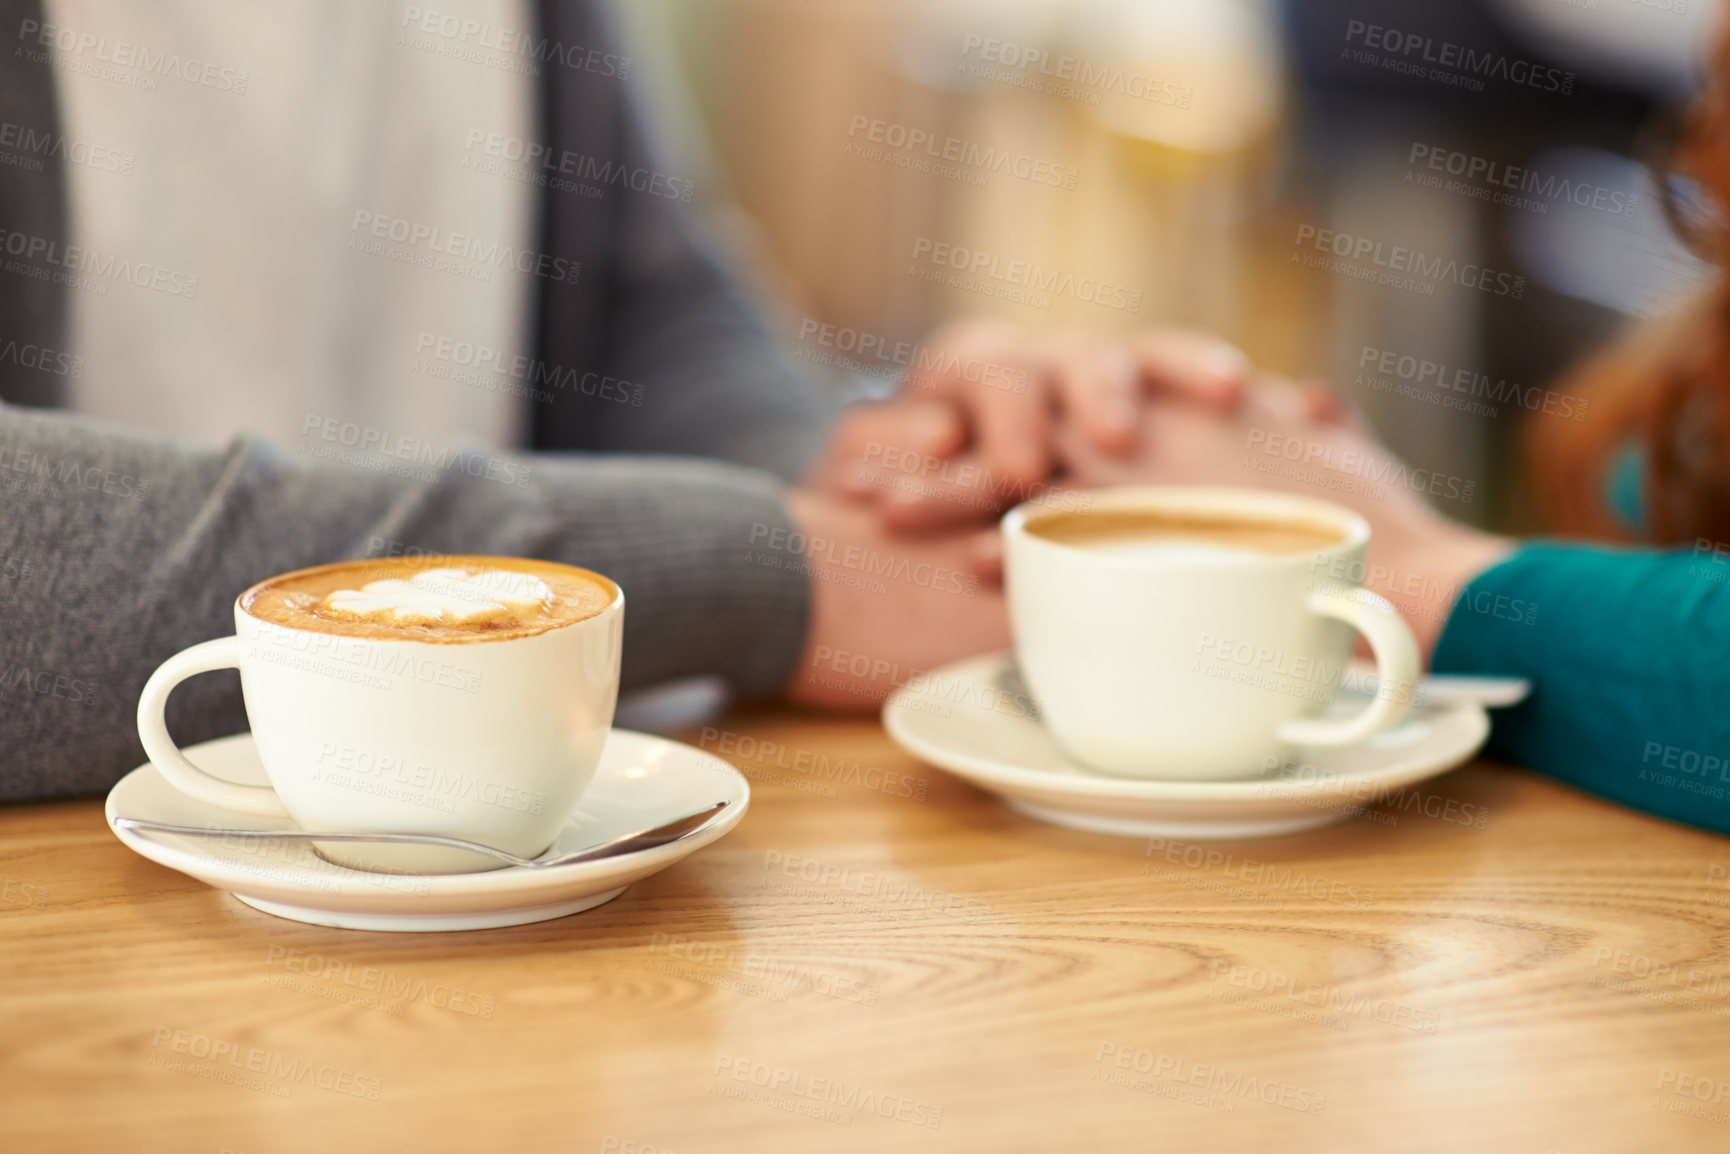 Buy stock photo A cropped shot of a young affectionate couple on a coffee date